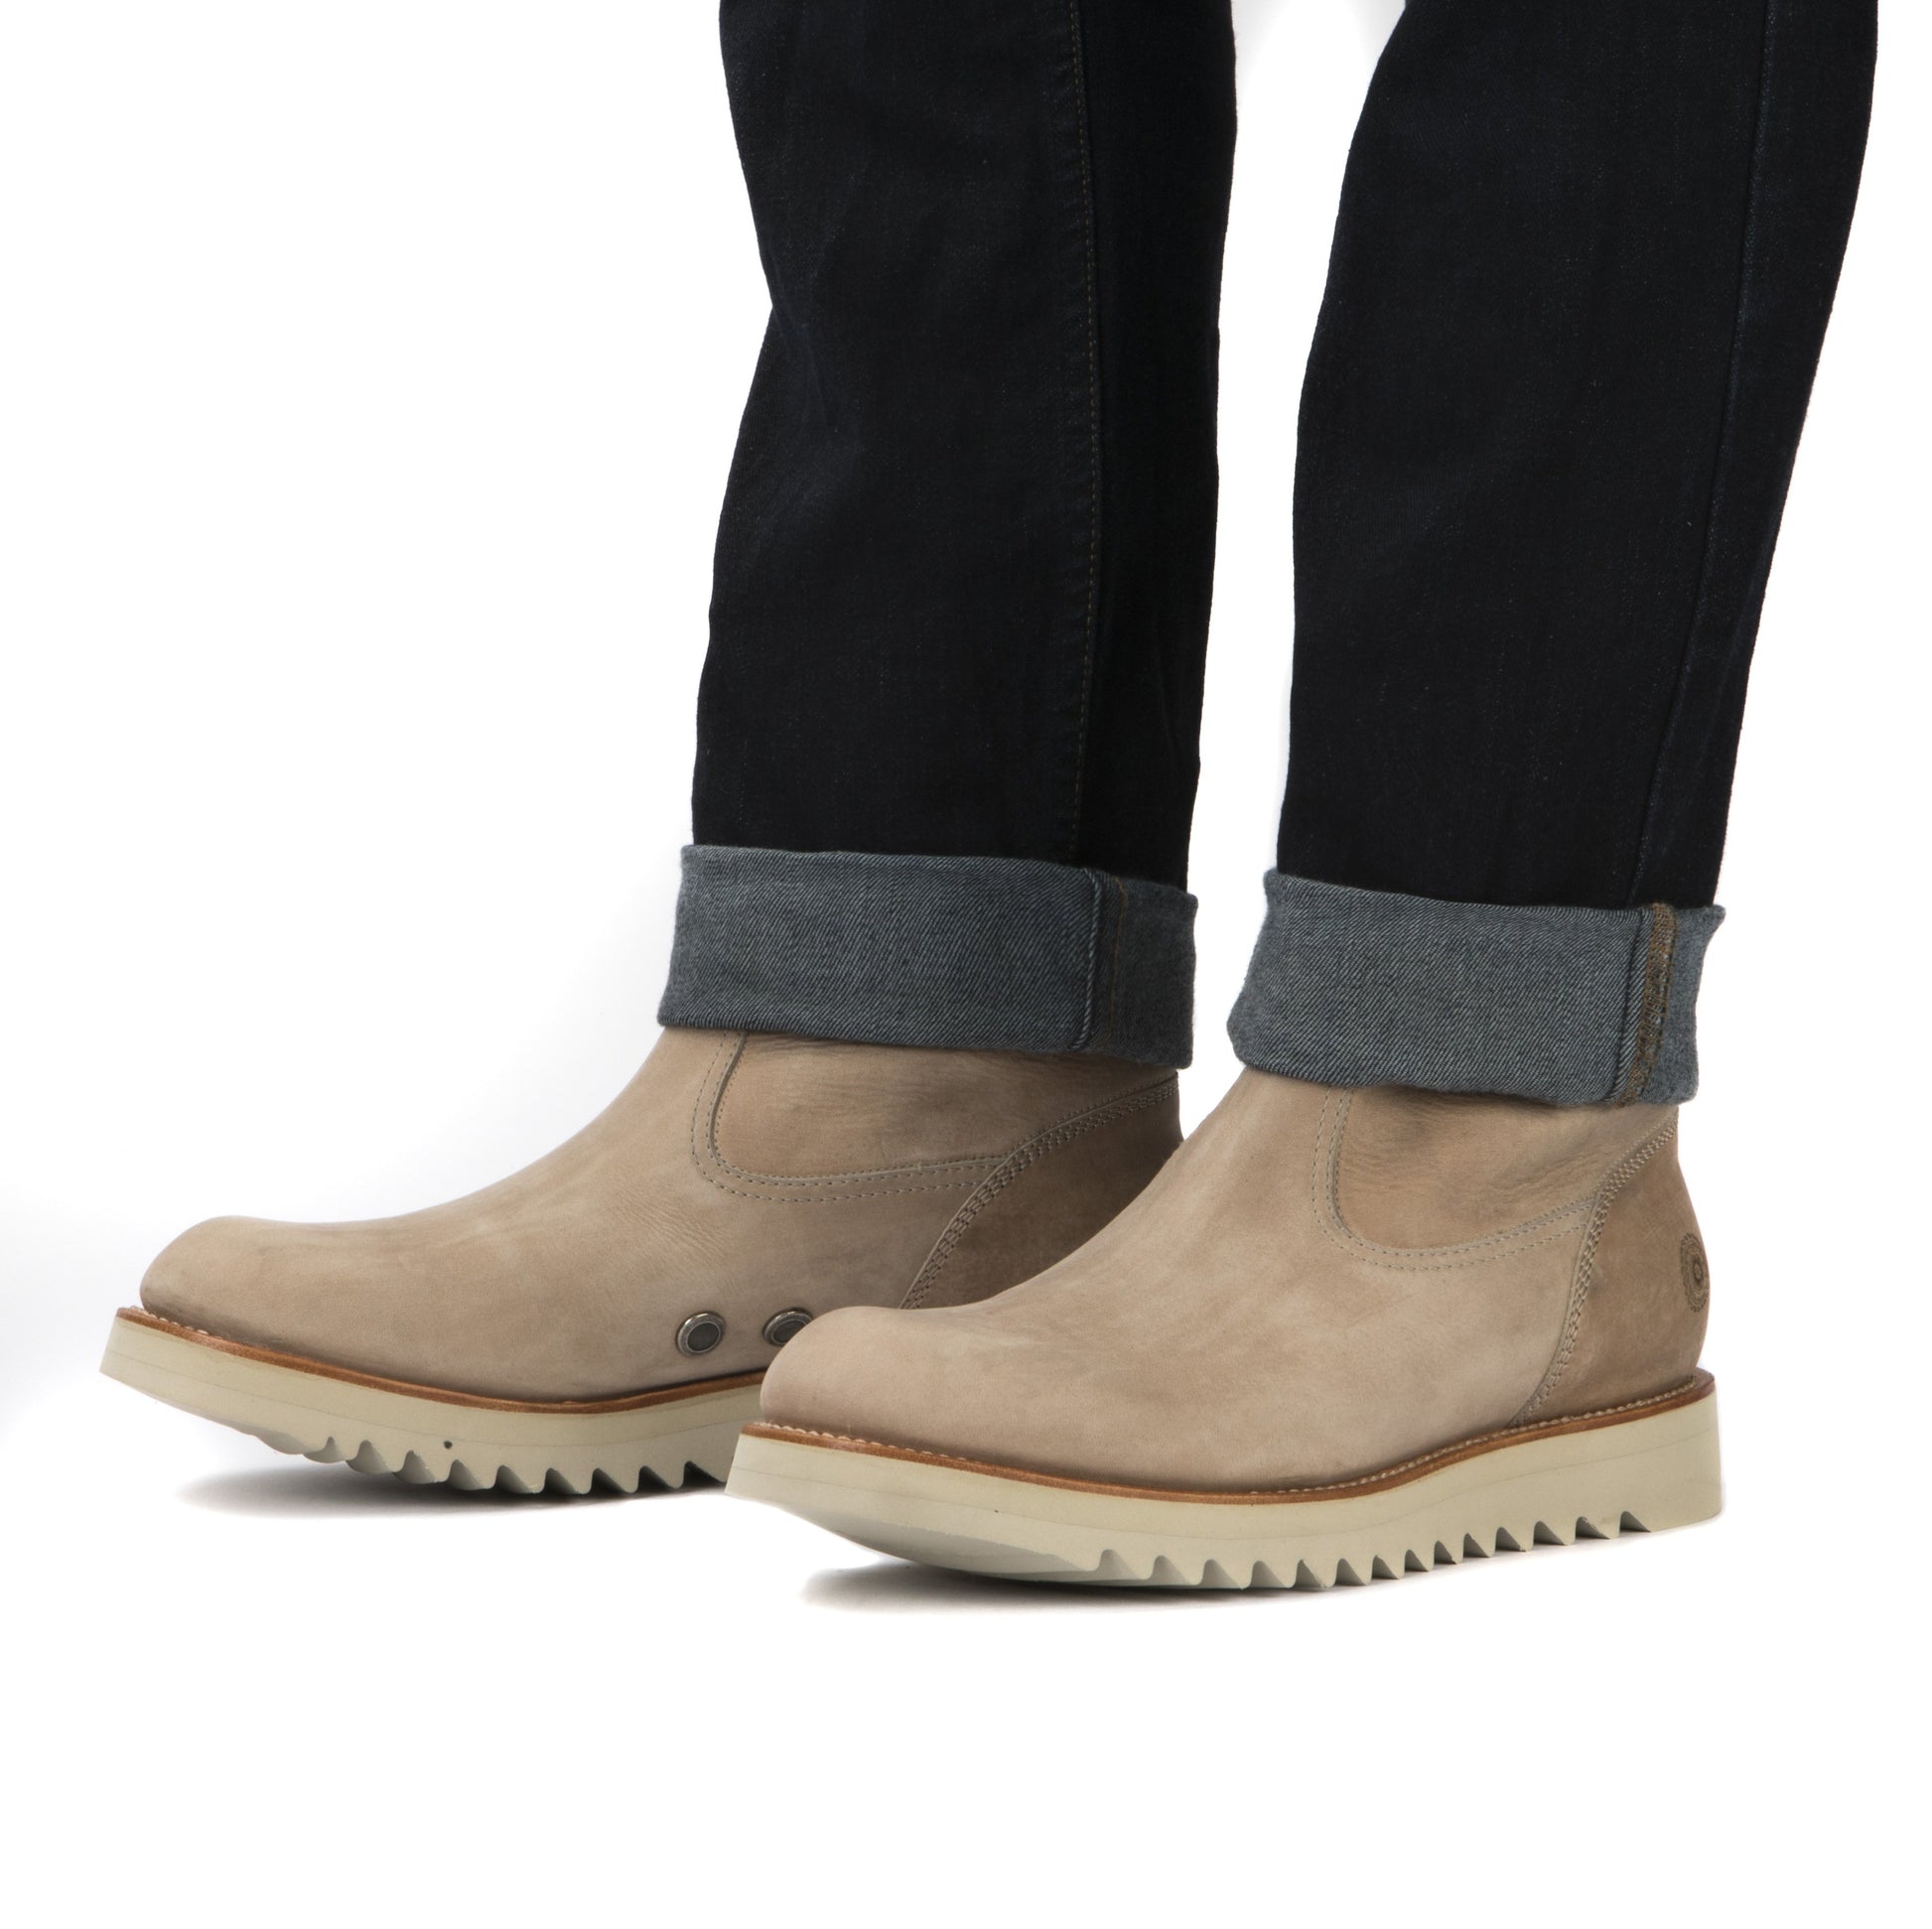 Mens Current Issue Wellington Sand Military Boots - Ranch Road Boots™ Pair